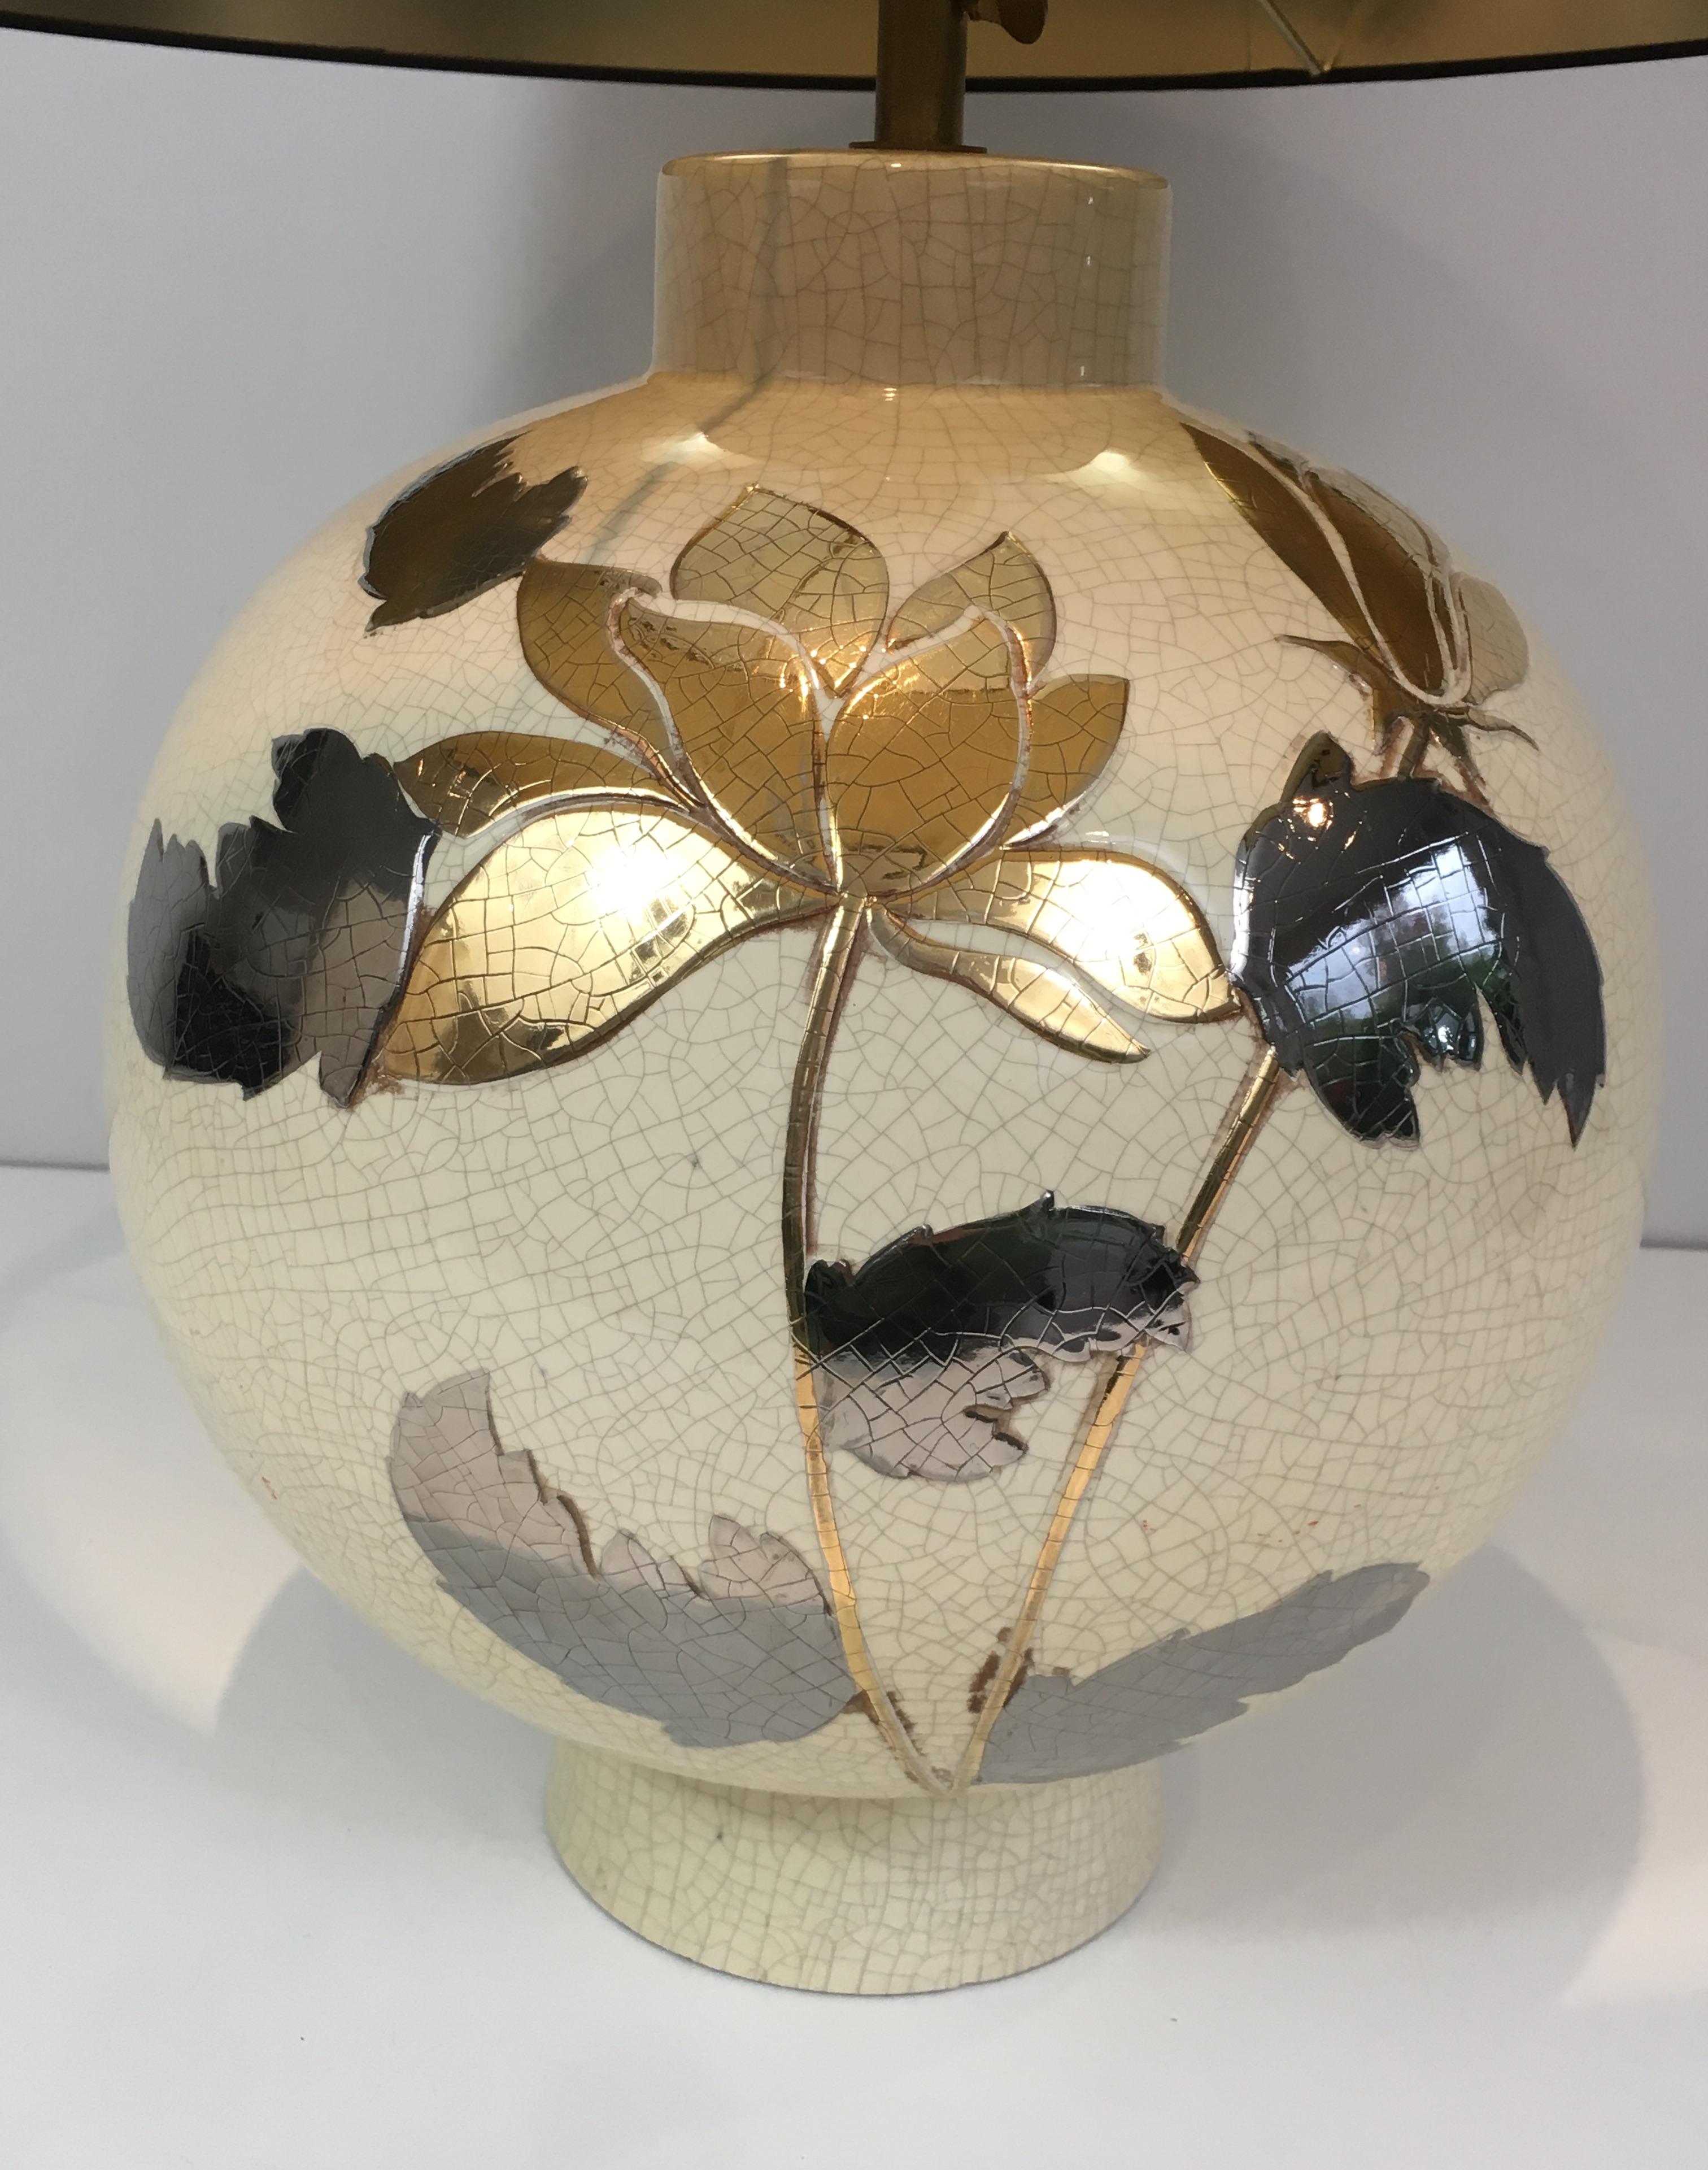 French By L Drummer, Cracked Ceramic Lamp with Silver and Gold Flower Decoration on the